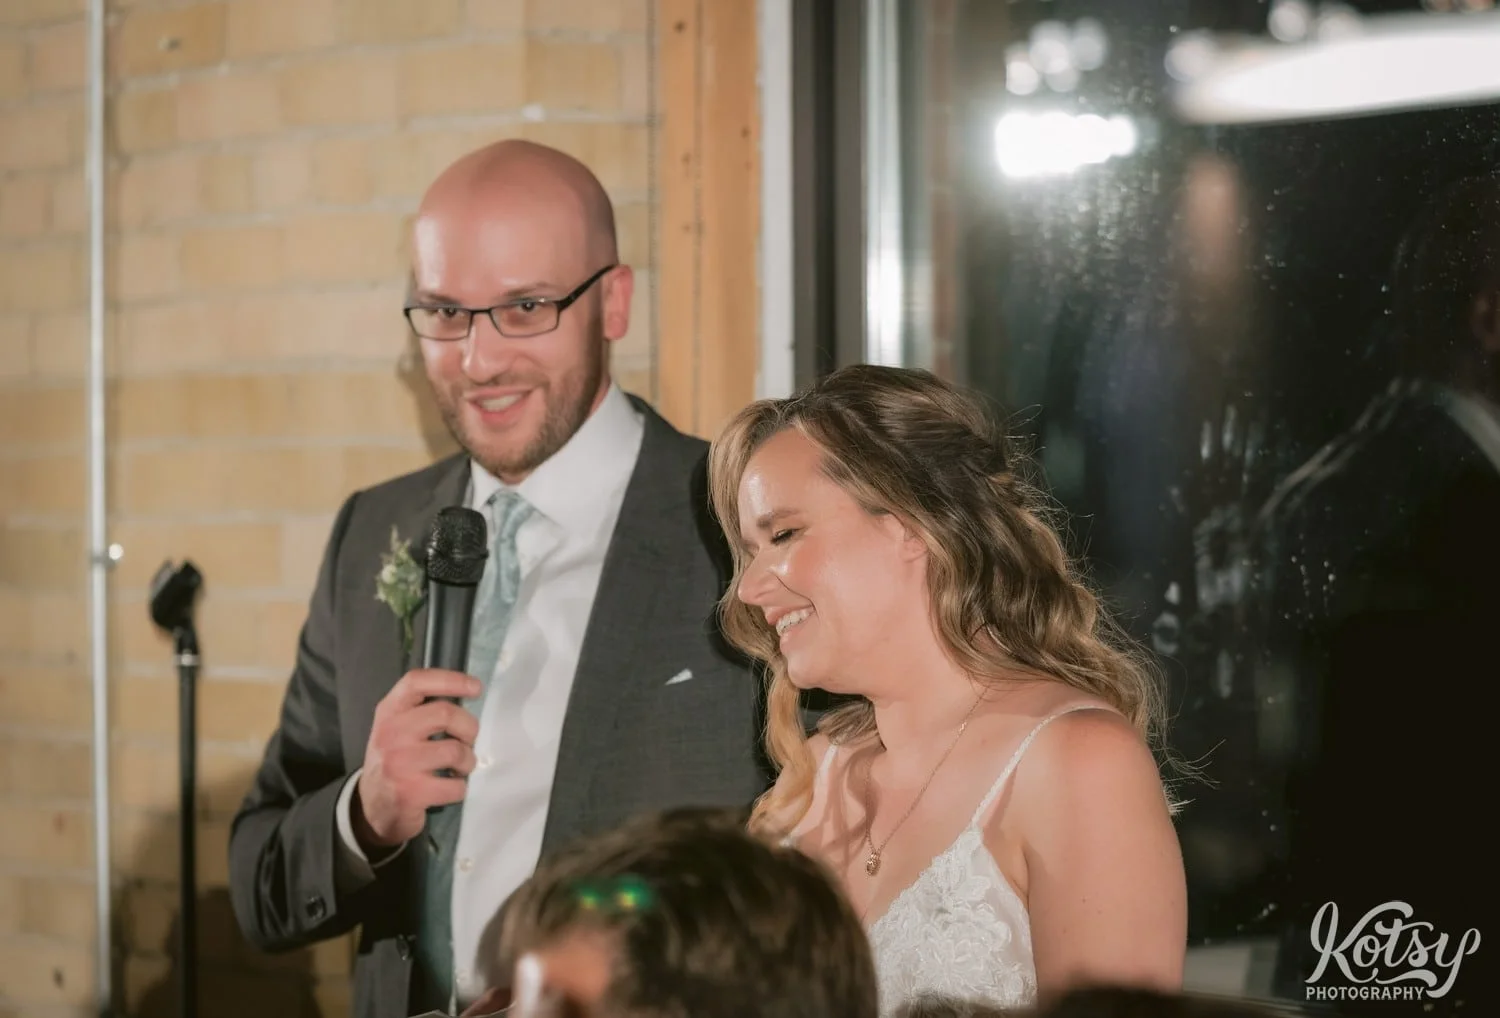 A bride in a white wedding gown enjoys a laugh as her groom in a gray suit and green tie speaks into a microphone during their Second Floor Events wedding reception in Toronto, Canada.